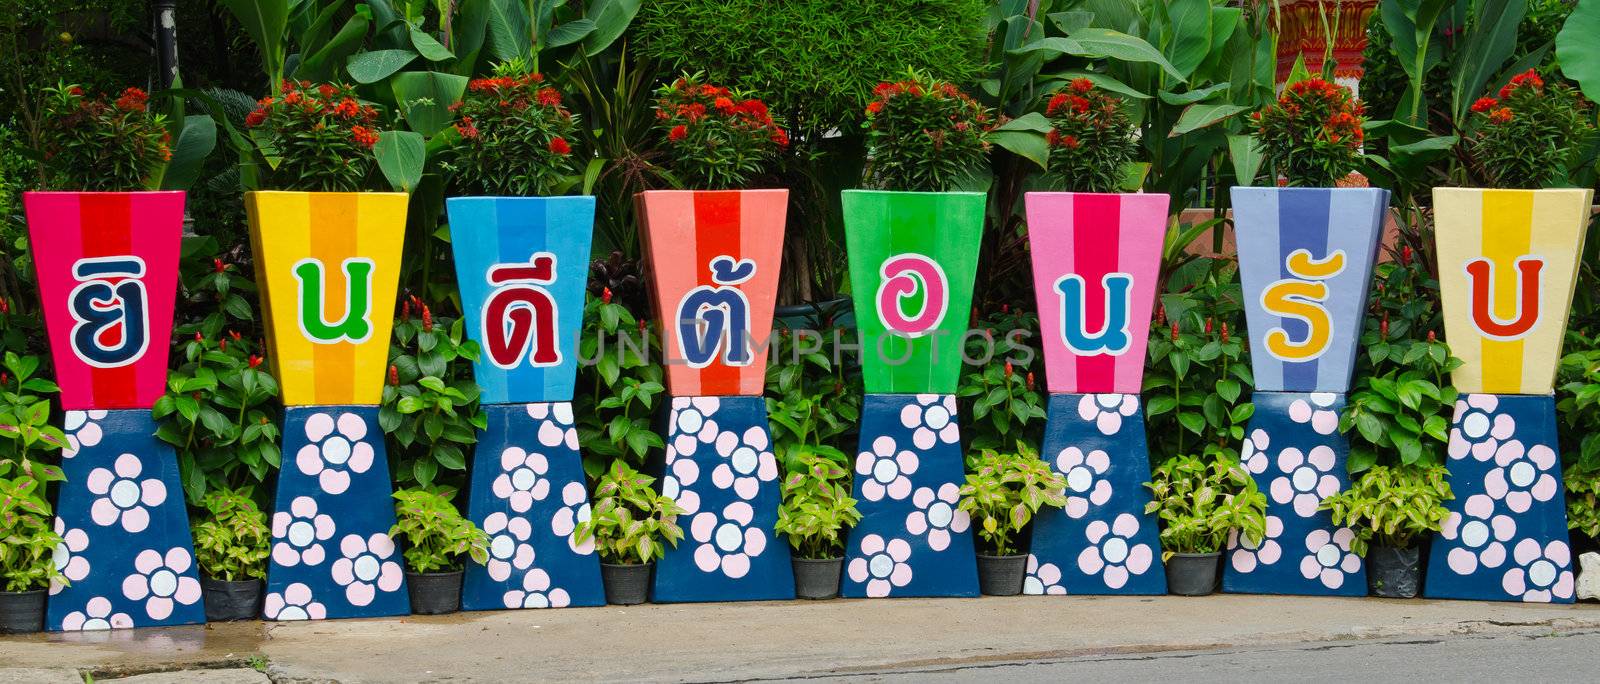 welcome sign word on flower pots by hinnamsaisuy